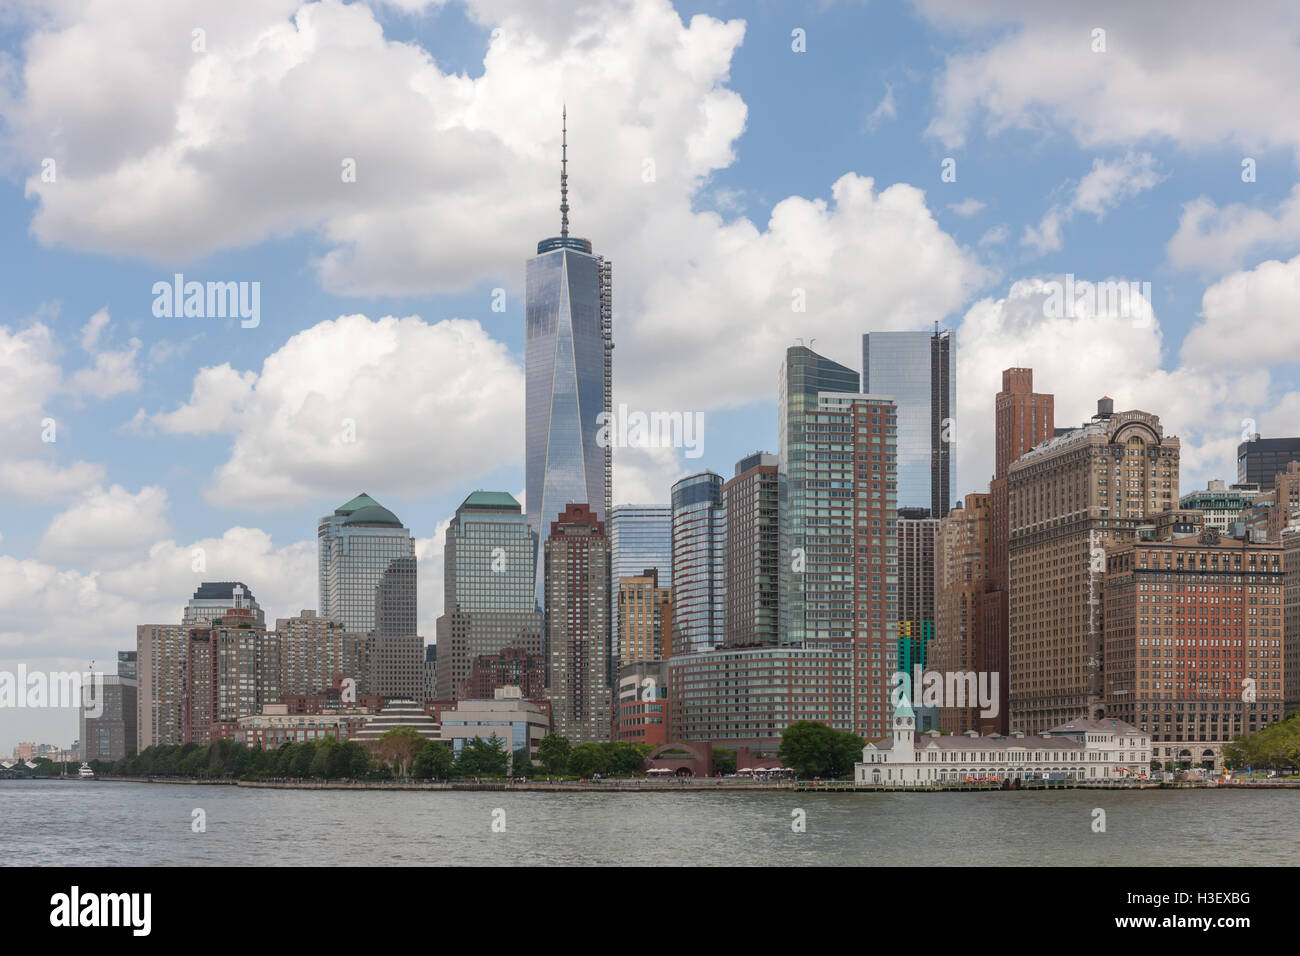 A view of lower Manhattan skyline and One World Trade Center in from New York Harbor in New York City. Stock Photo